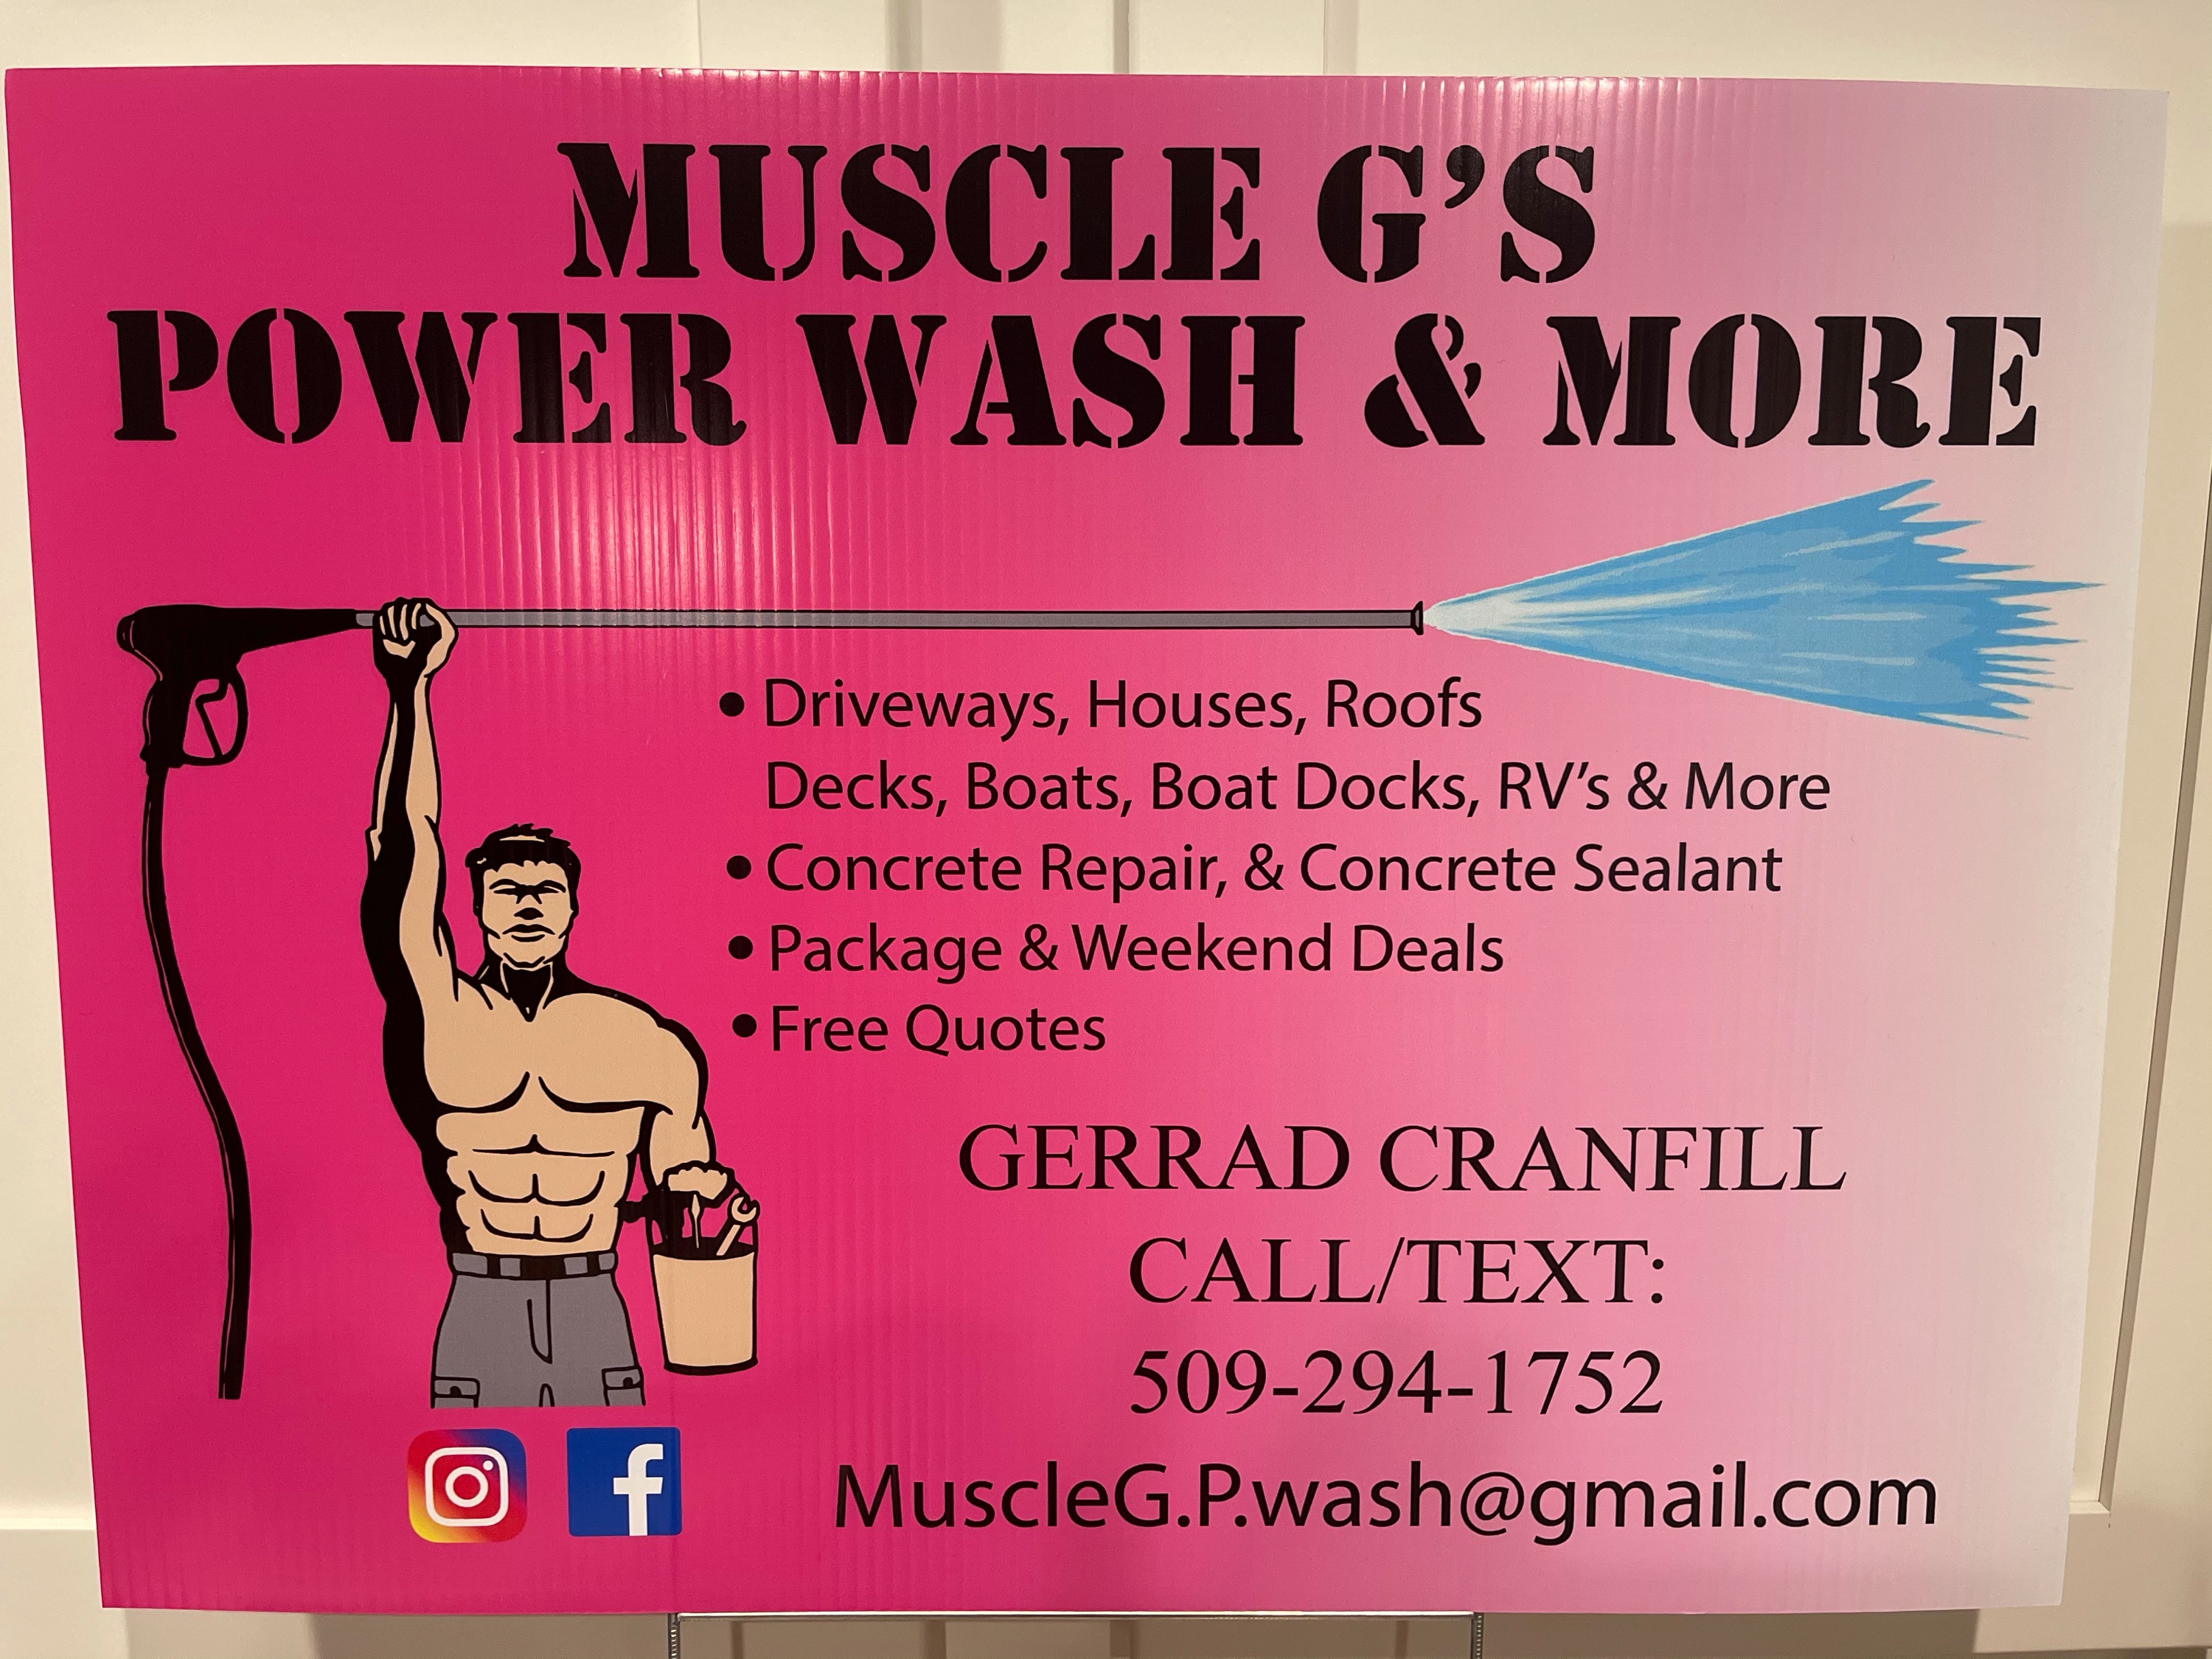 Muscle Gs Power Wash & More - Home  Facebook Logo